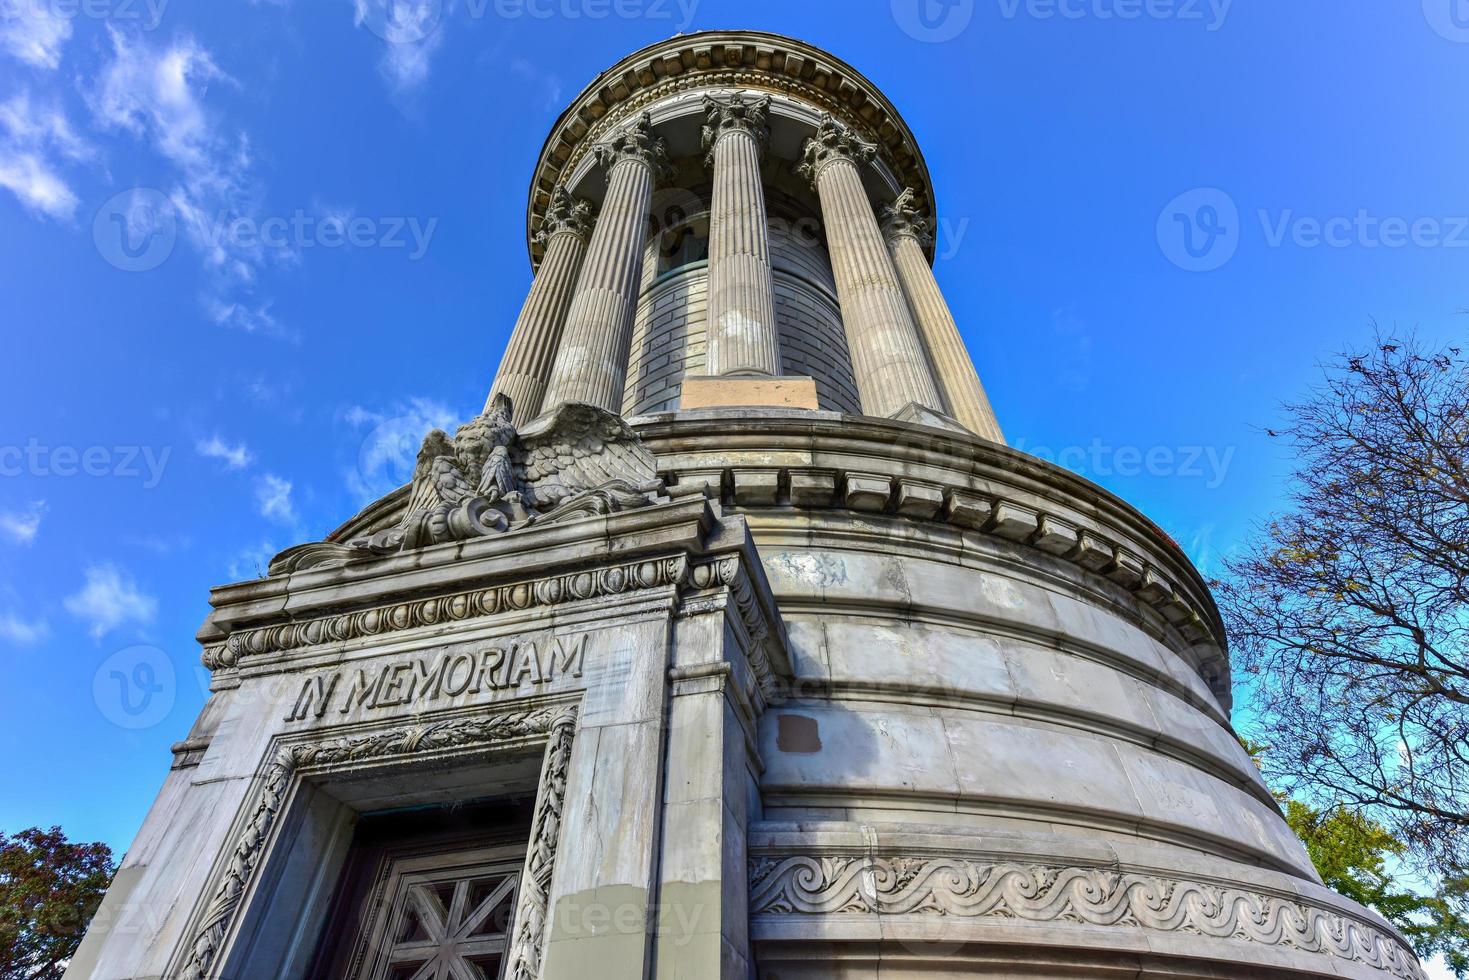 The Soldiers' and Sailors' Memorial Monument in Riverside Park in the Upper West Side of Manhattan, New York City, commemorates Union Army soldiers and sailors who served in the American Civil War. photo